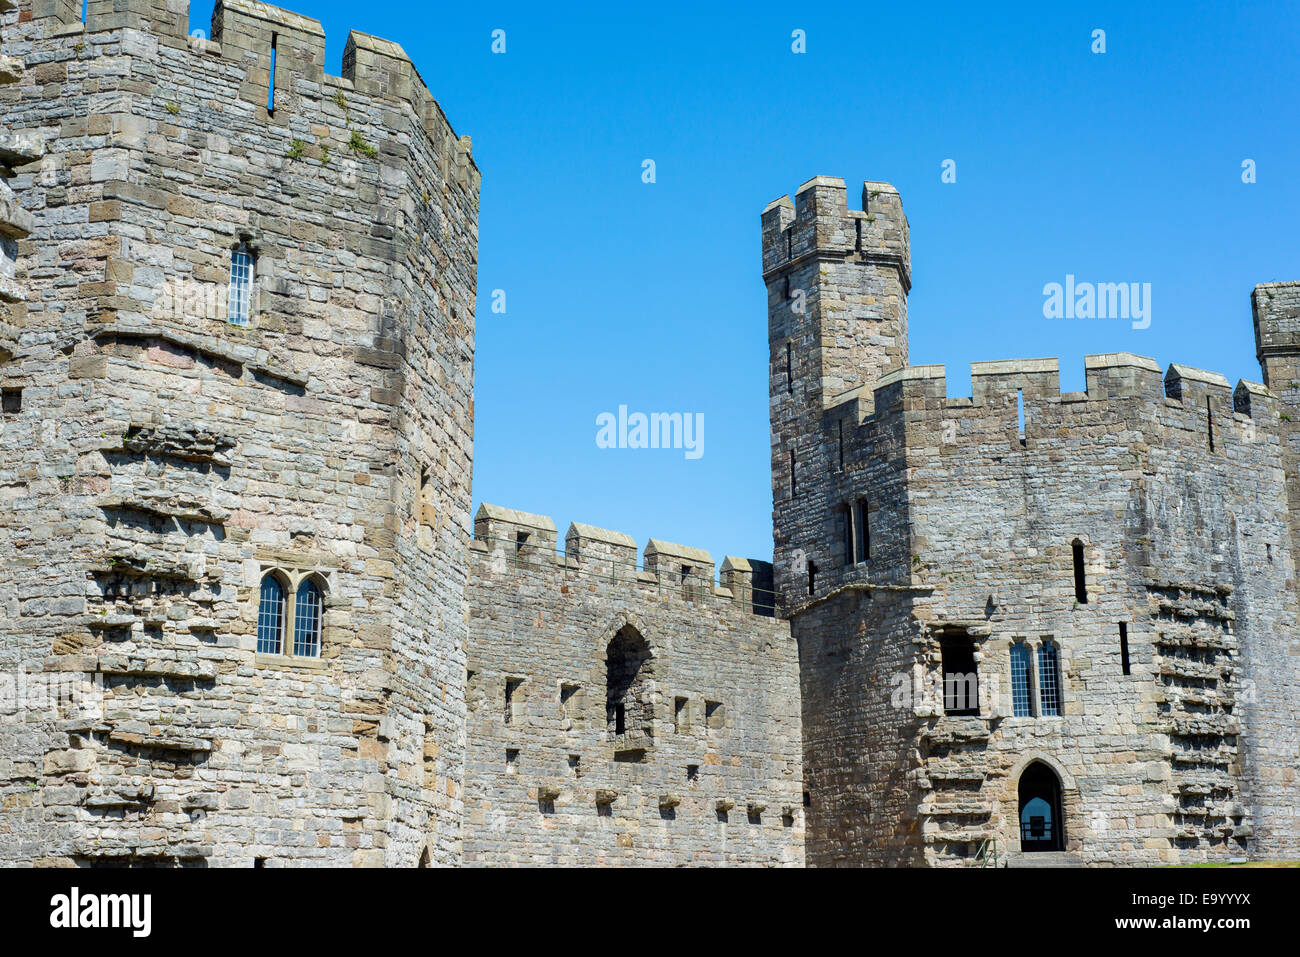 The exterior walls of Caernarfon Castle in North Wales Stock Photo